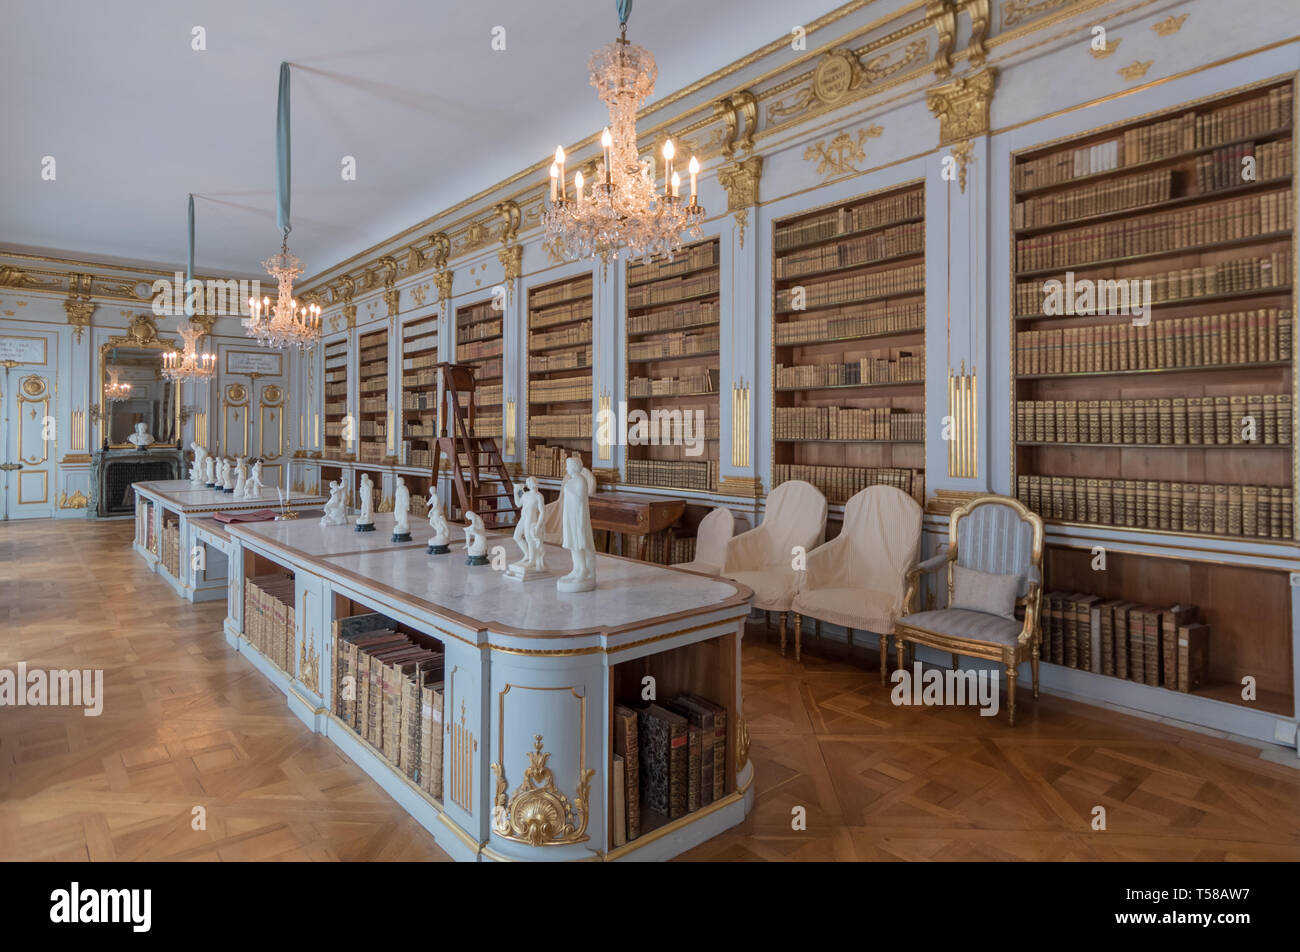 Lovisa Ulrika's Library in Drottningholm Palace replete with medallions, ornamentation, text panels, and alternating 3 crown and laurel monograms Stock Photo